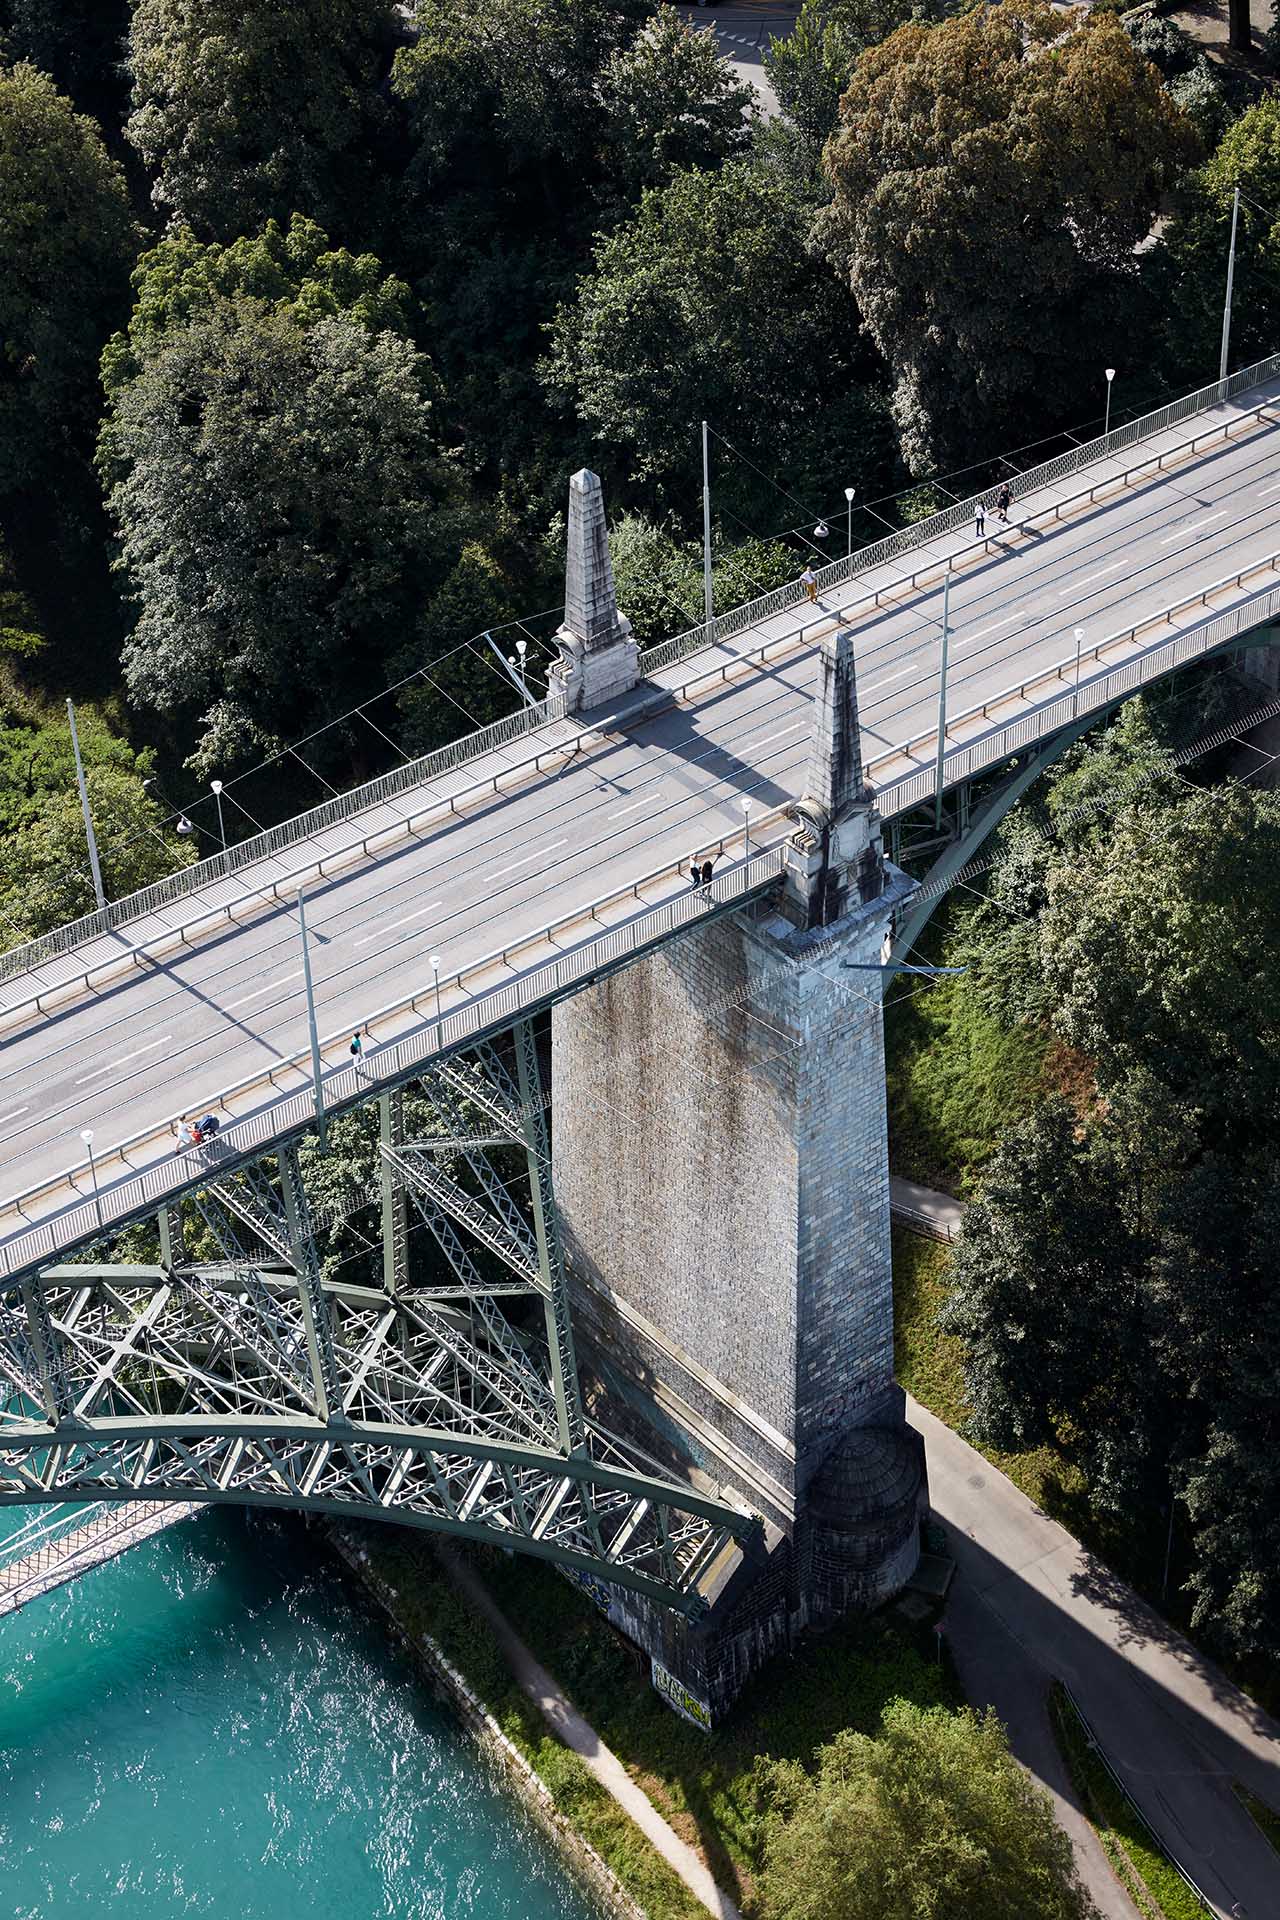 historic bridge over river with safety net